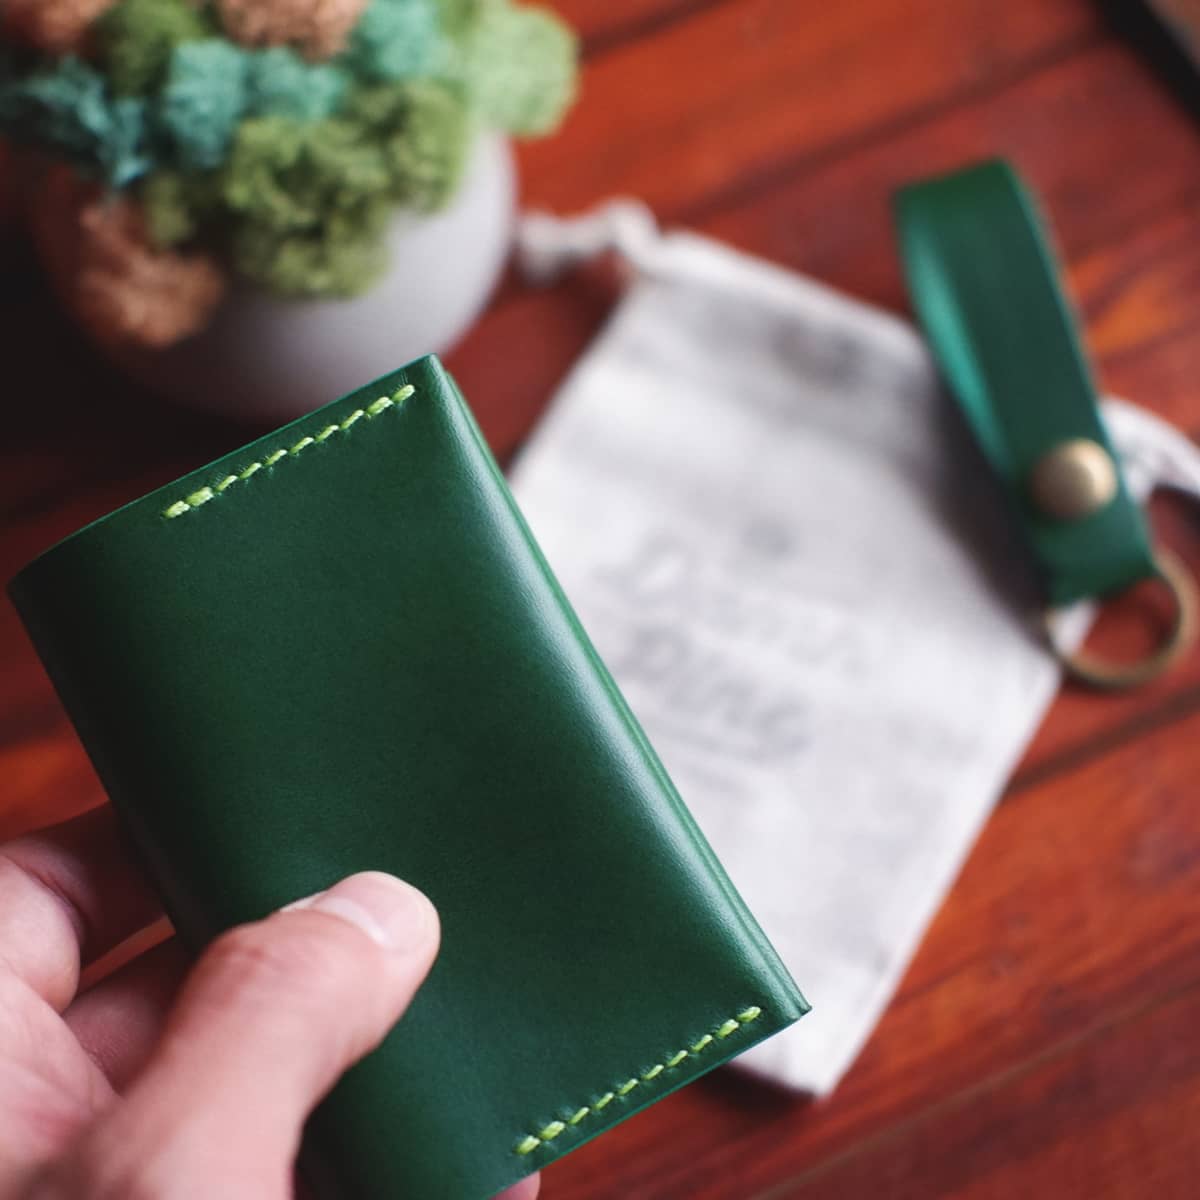 Exterior of The Mountain One Piece Bifold wallet in Green Buttero leather